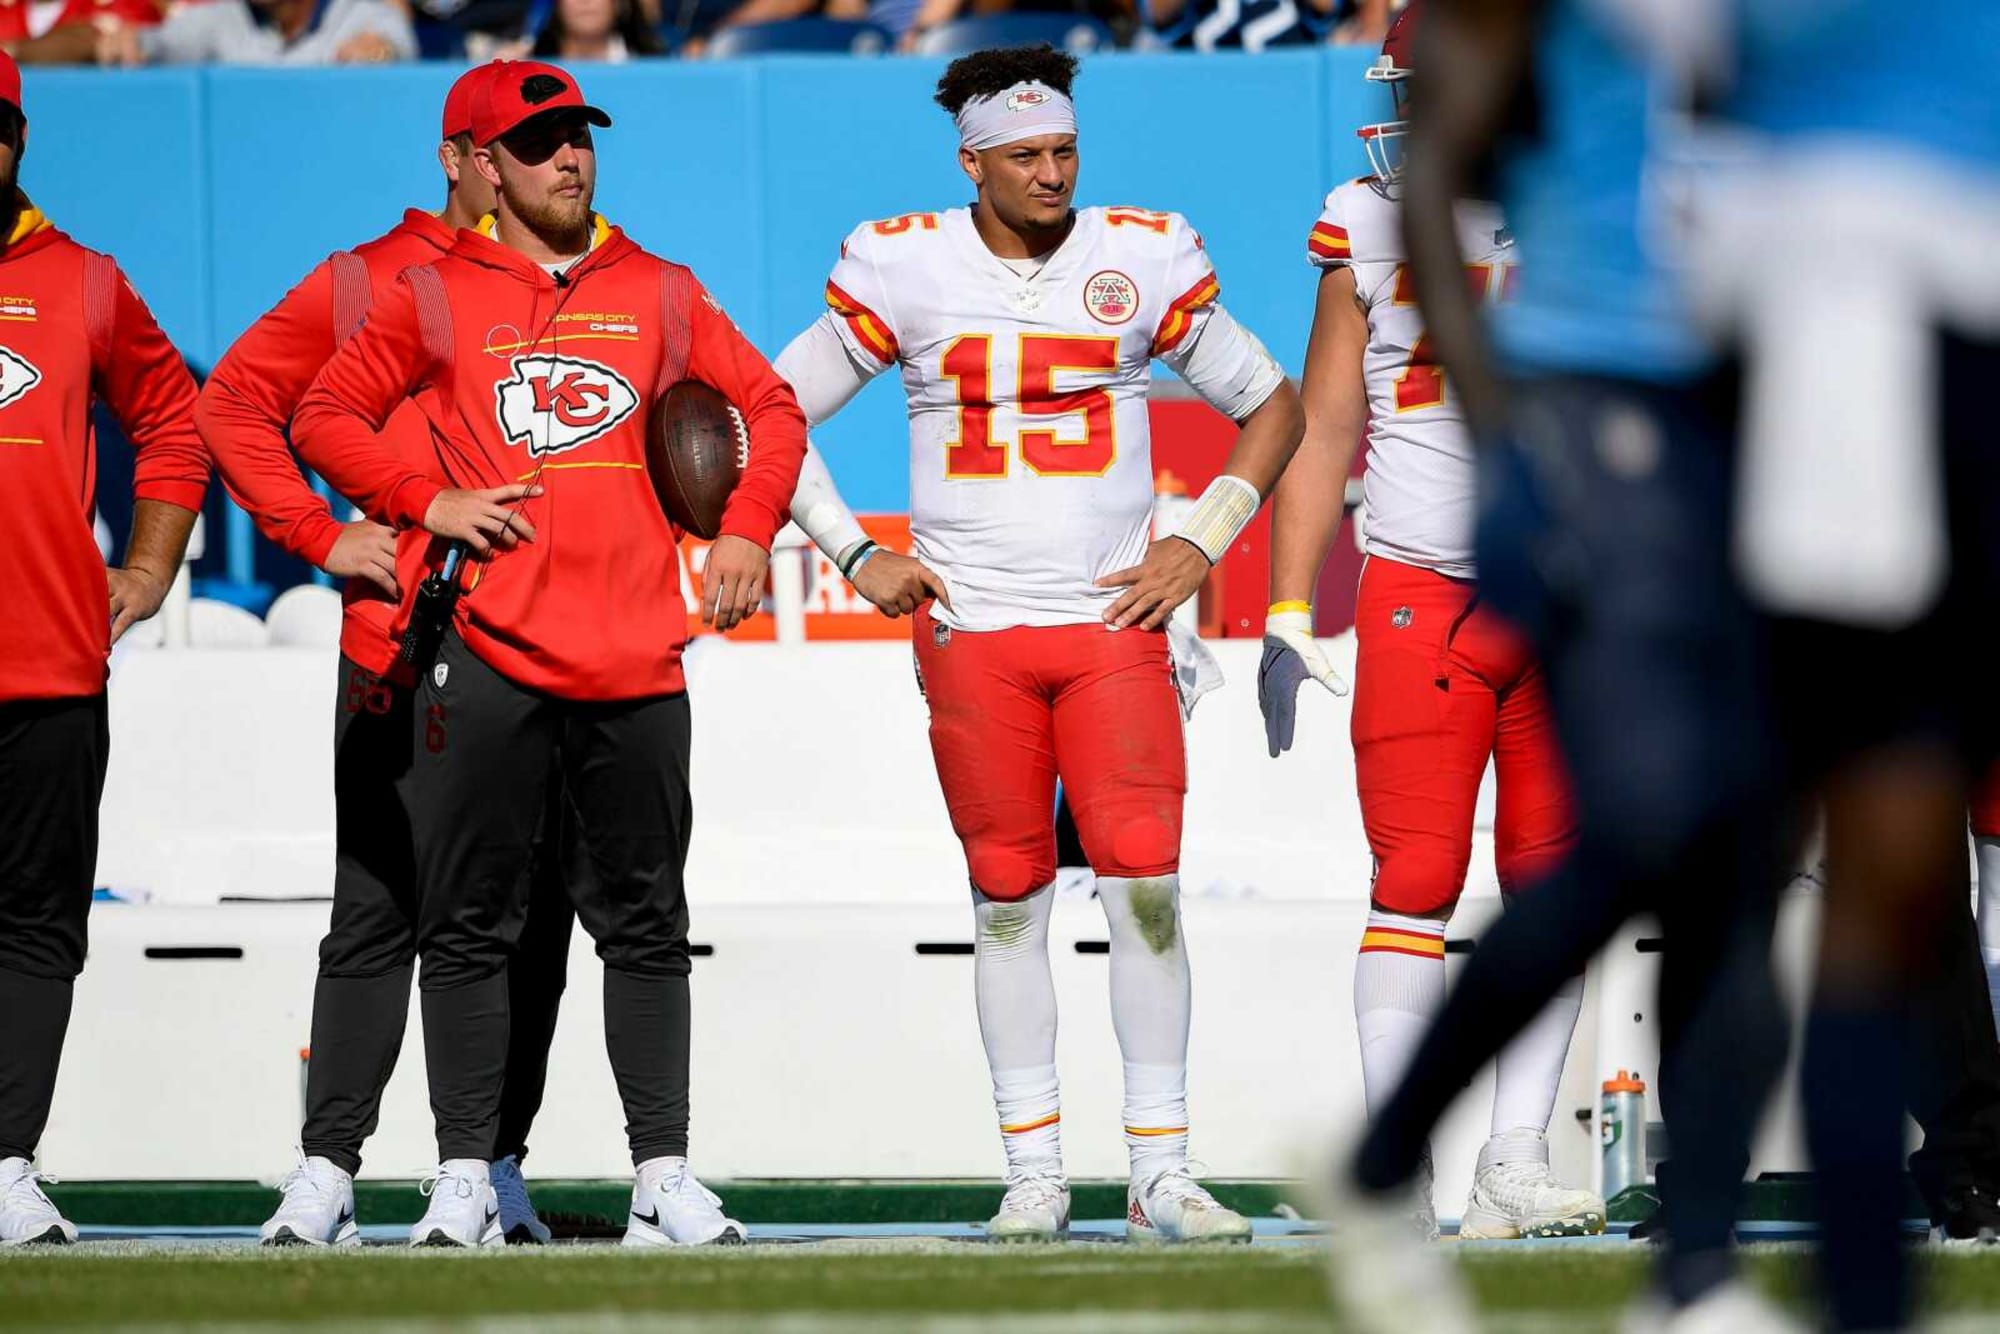 Are the Chiefs going to make the playoffs? Look at their schedule